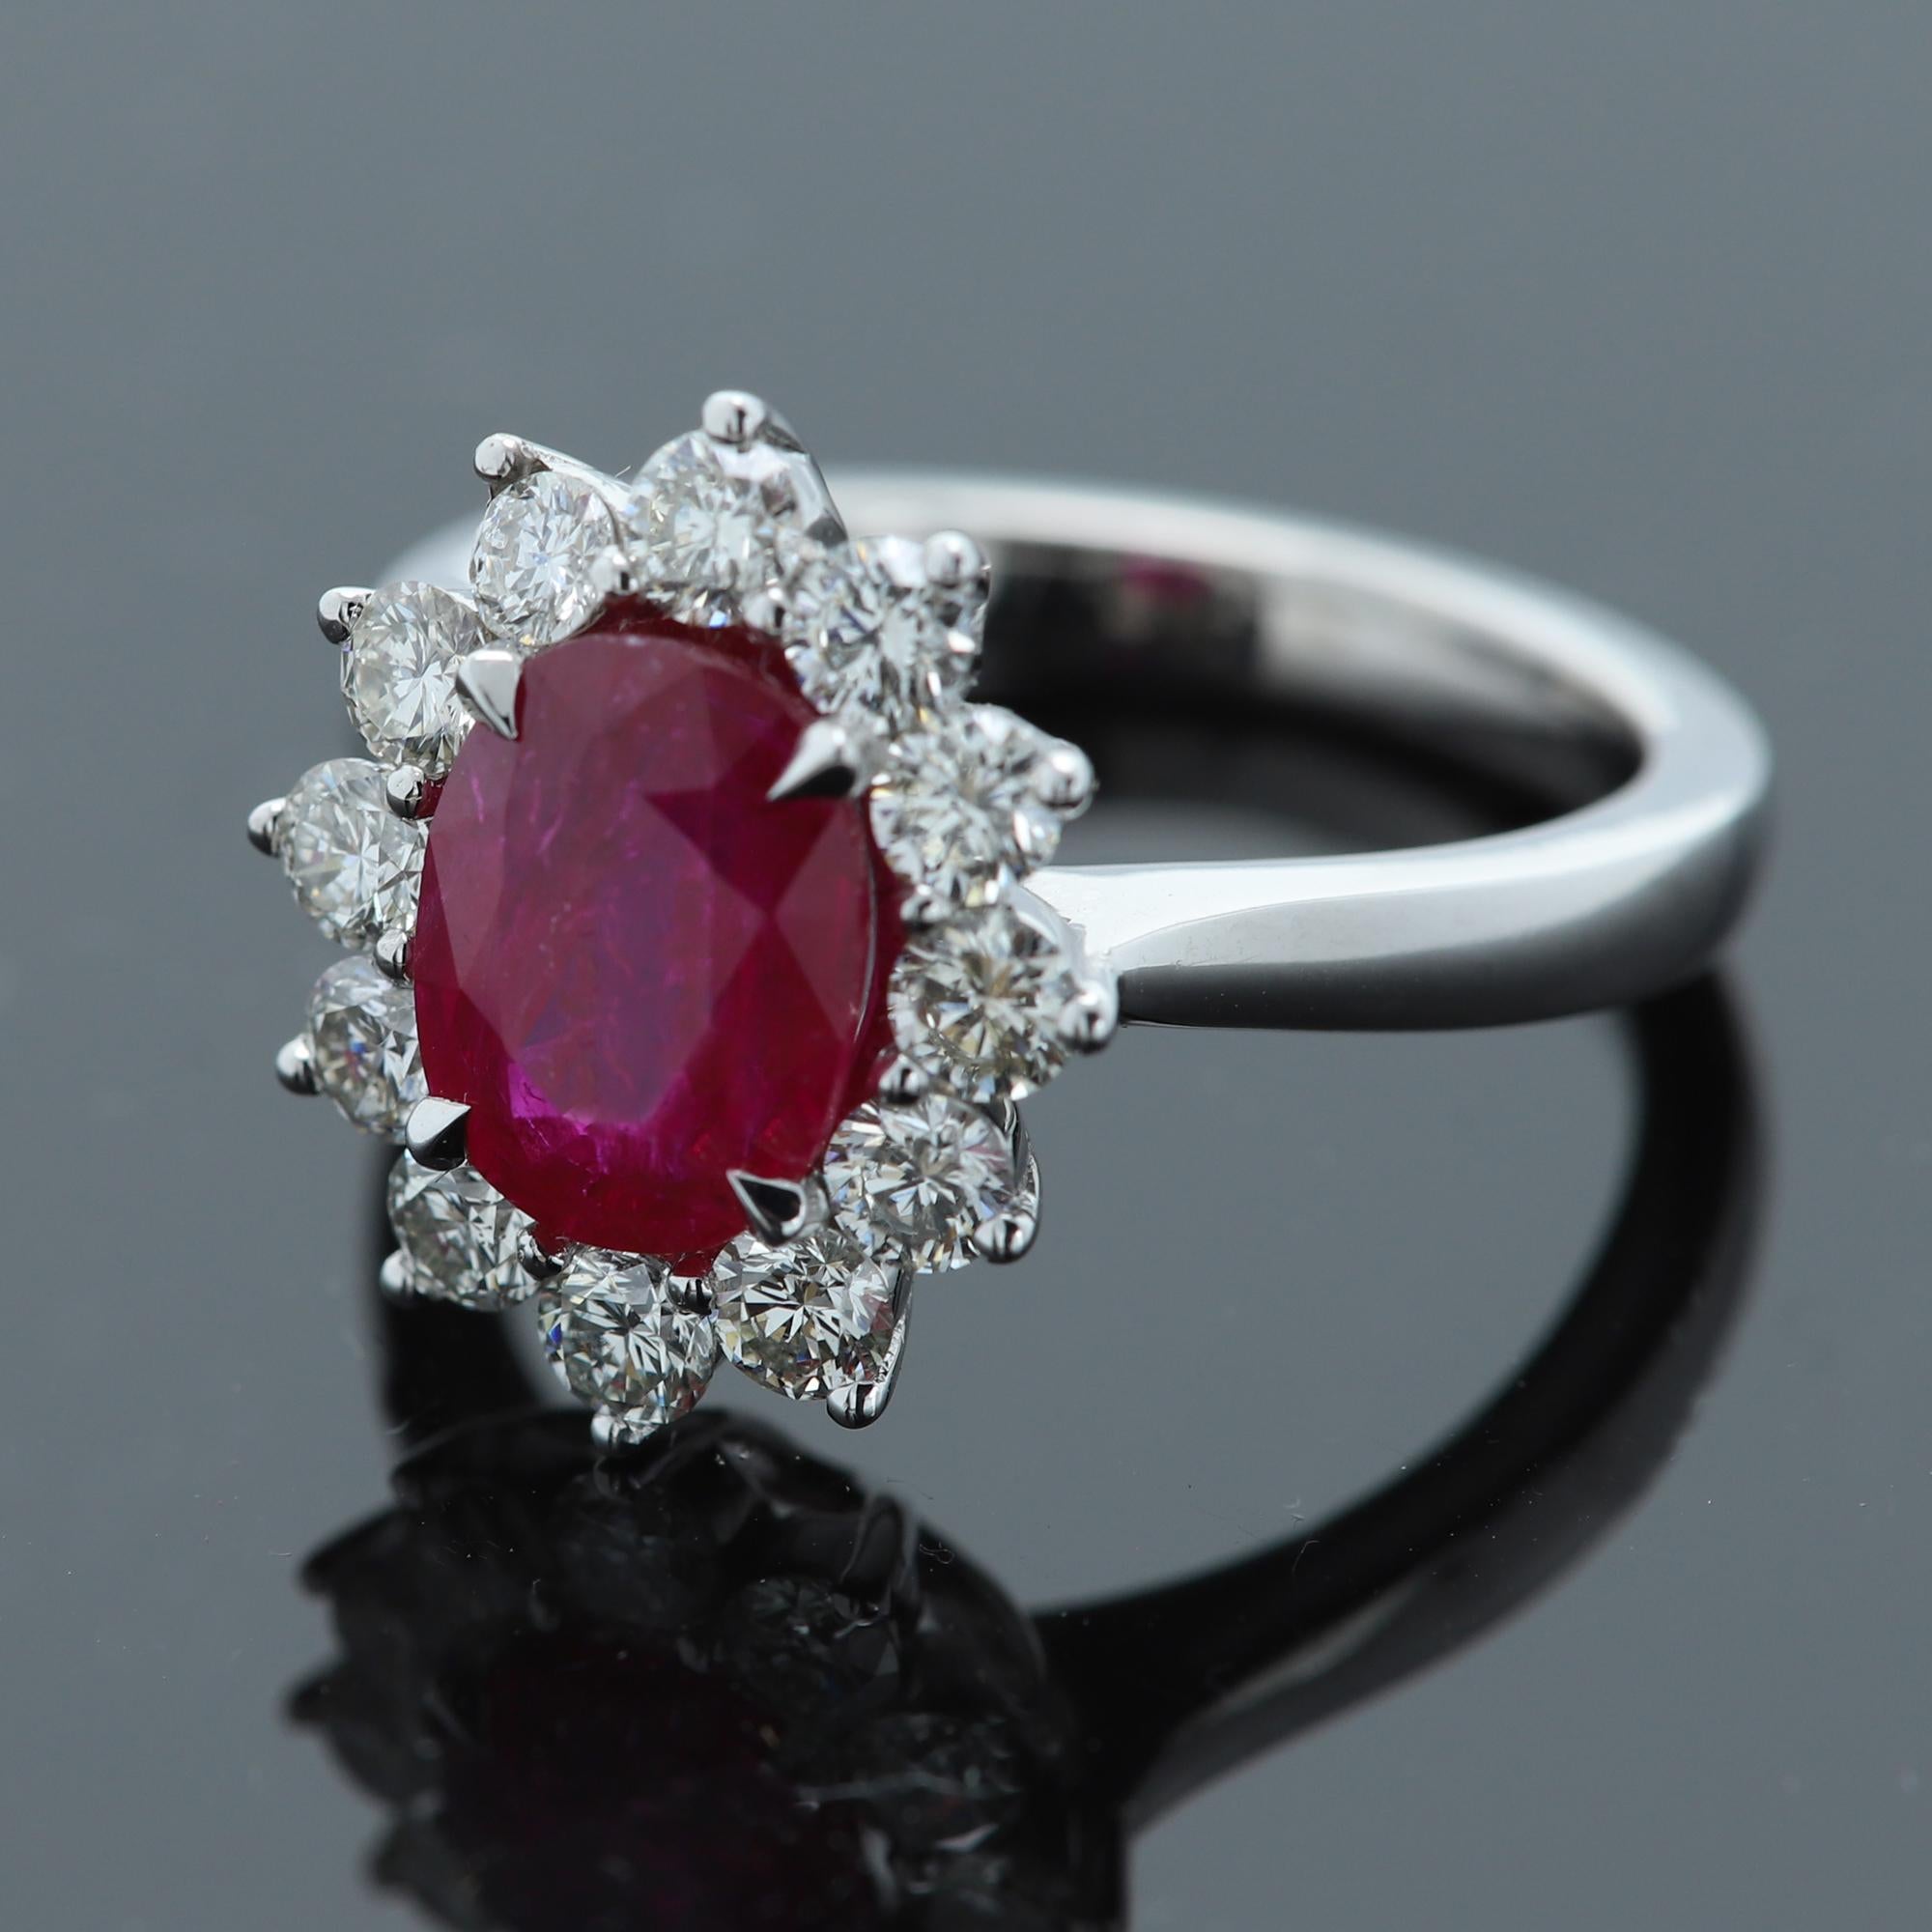 Classic Diana Style Ruby & Diamonds Cocktail Ring
18k White Gold 7.2 grams  
Ruby 2.88 Carat Oval shape approx size 9 x 7 mm Strong Red Red Tone with some inclusions that are not significant visable to the regular distance eye, the stone is